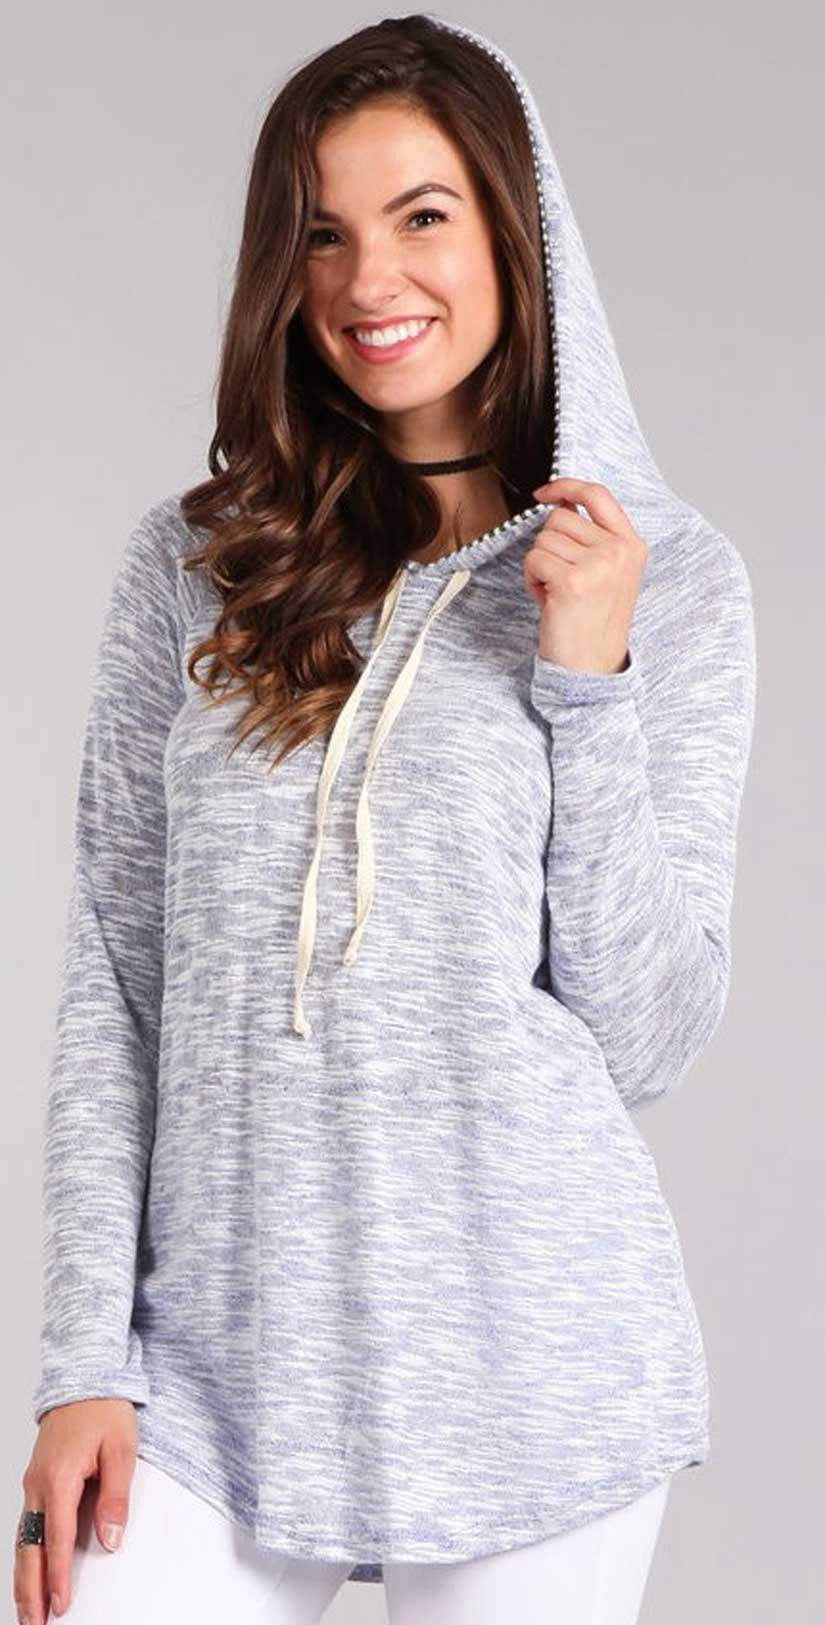 Chris and Carol Heathered Knit Long Sleeve Top with Striped Hoodie in Blue 1610080T: